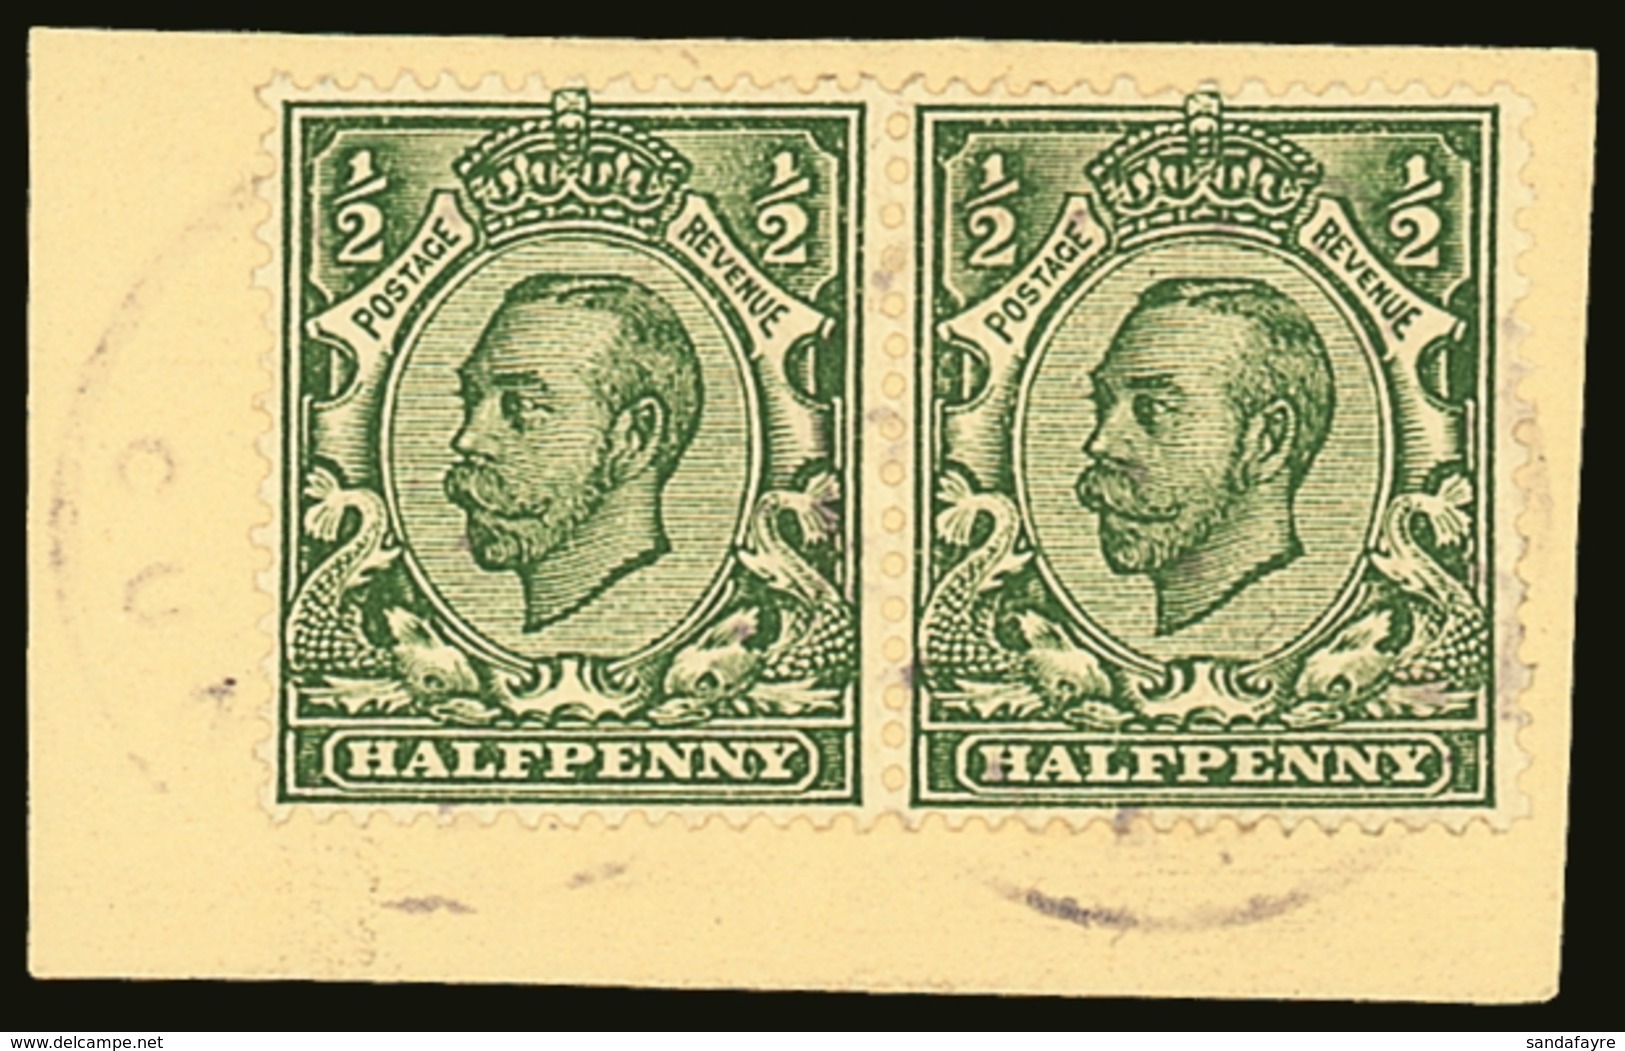 1908 GB USED ON TRISTAN ½d Pair, Tied To Good Sized Piece By The 1908 Type I Cachet,  SG C1, Rather Faint But Still Very - Tristan Da Cunha